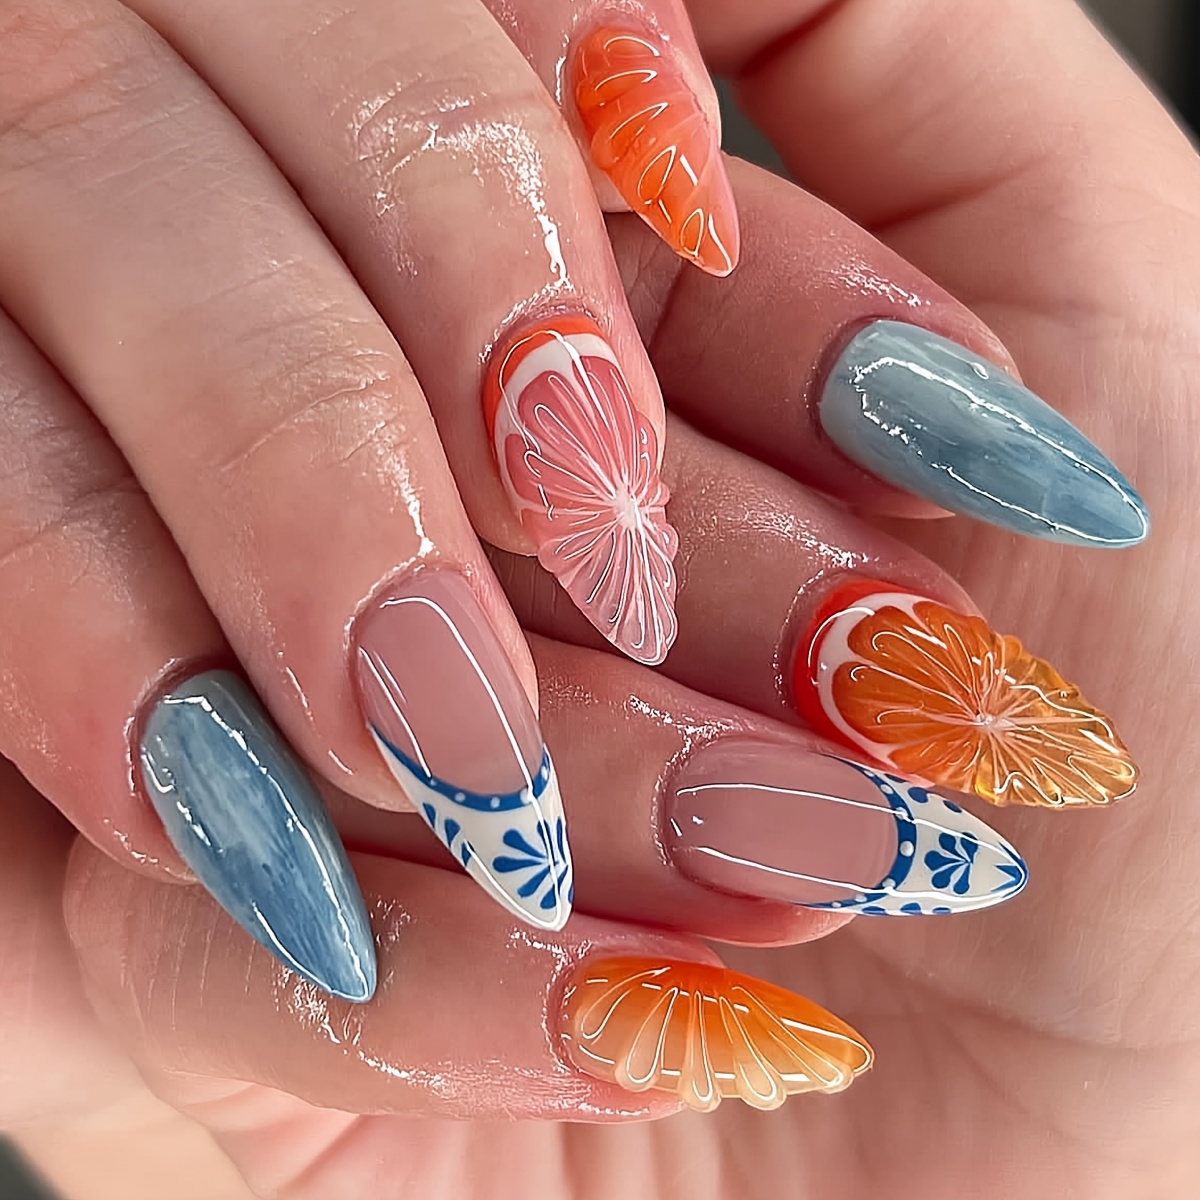 

24pcs Pink French Tip Press-on Nails, Almond Fake Nails With 3d Embossed Colorful Orange Sunburst Design, Glossy Full Cover False Nails For Wome